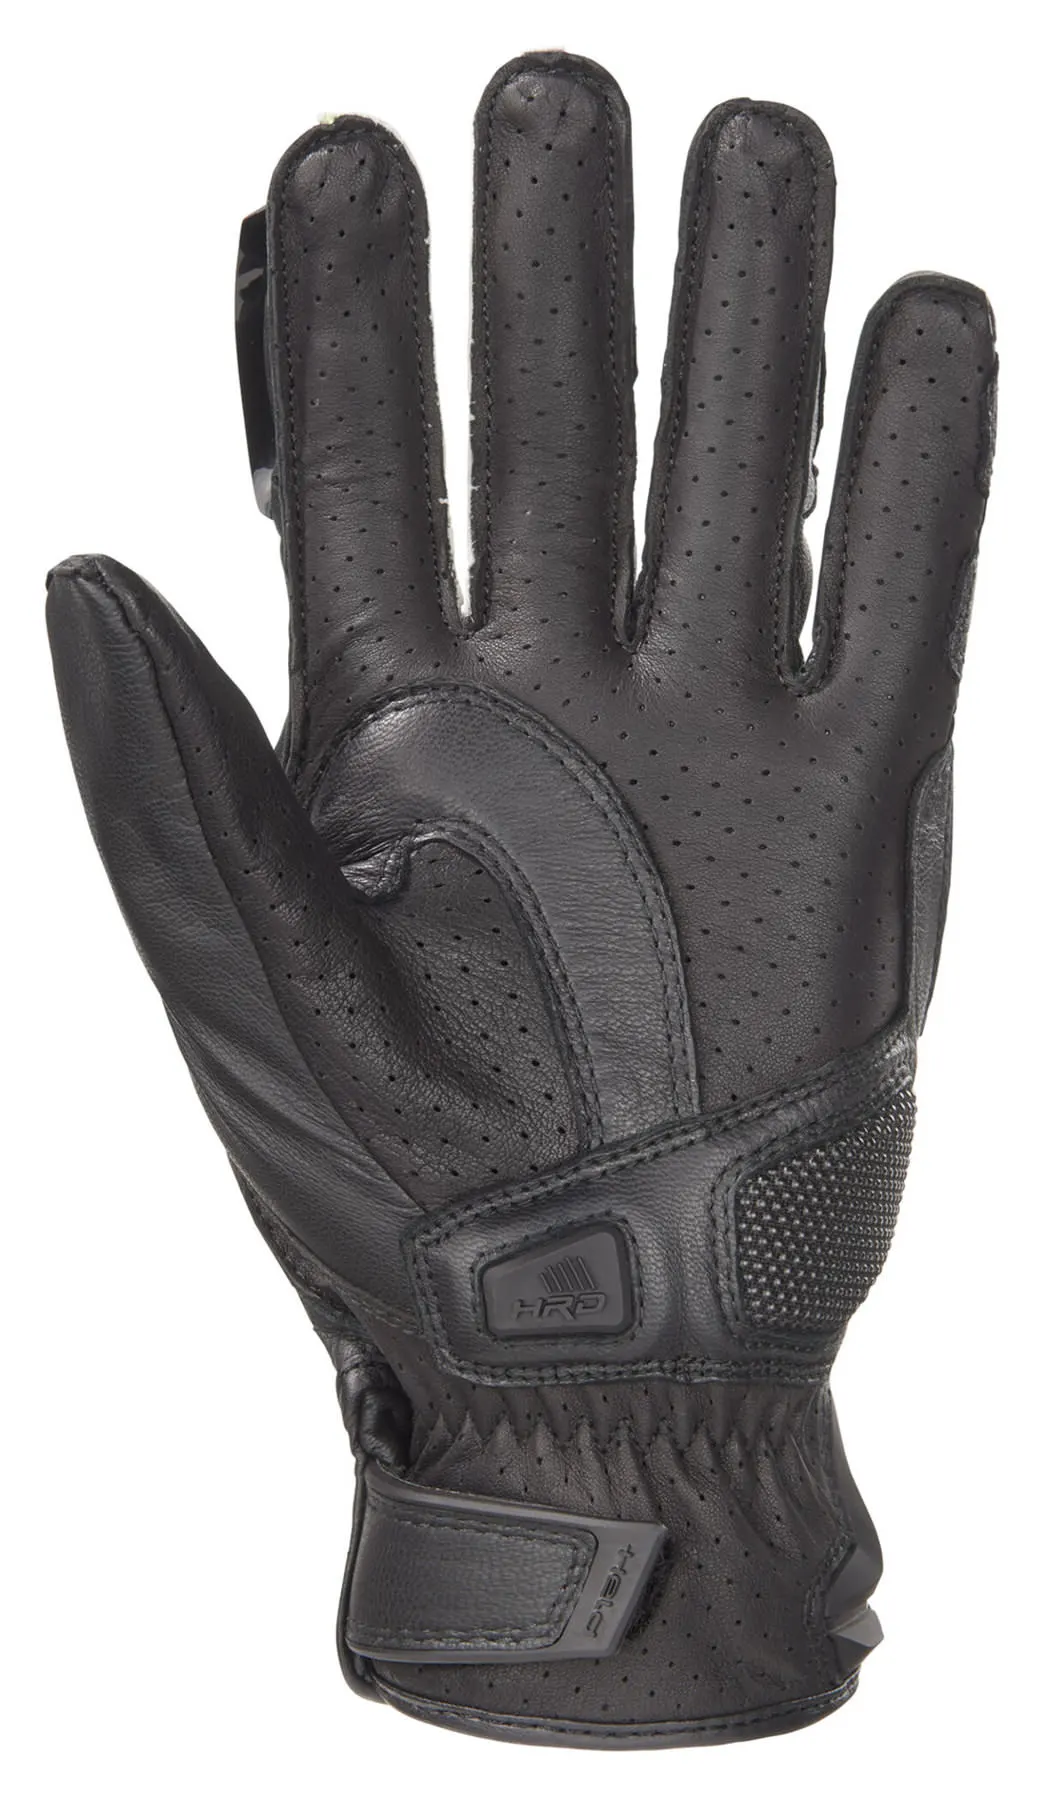 HELD 21912 LE GLOVE